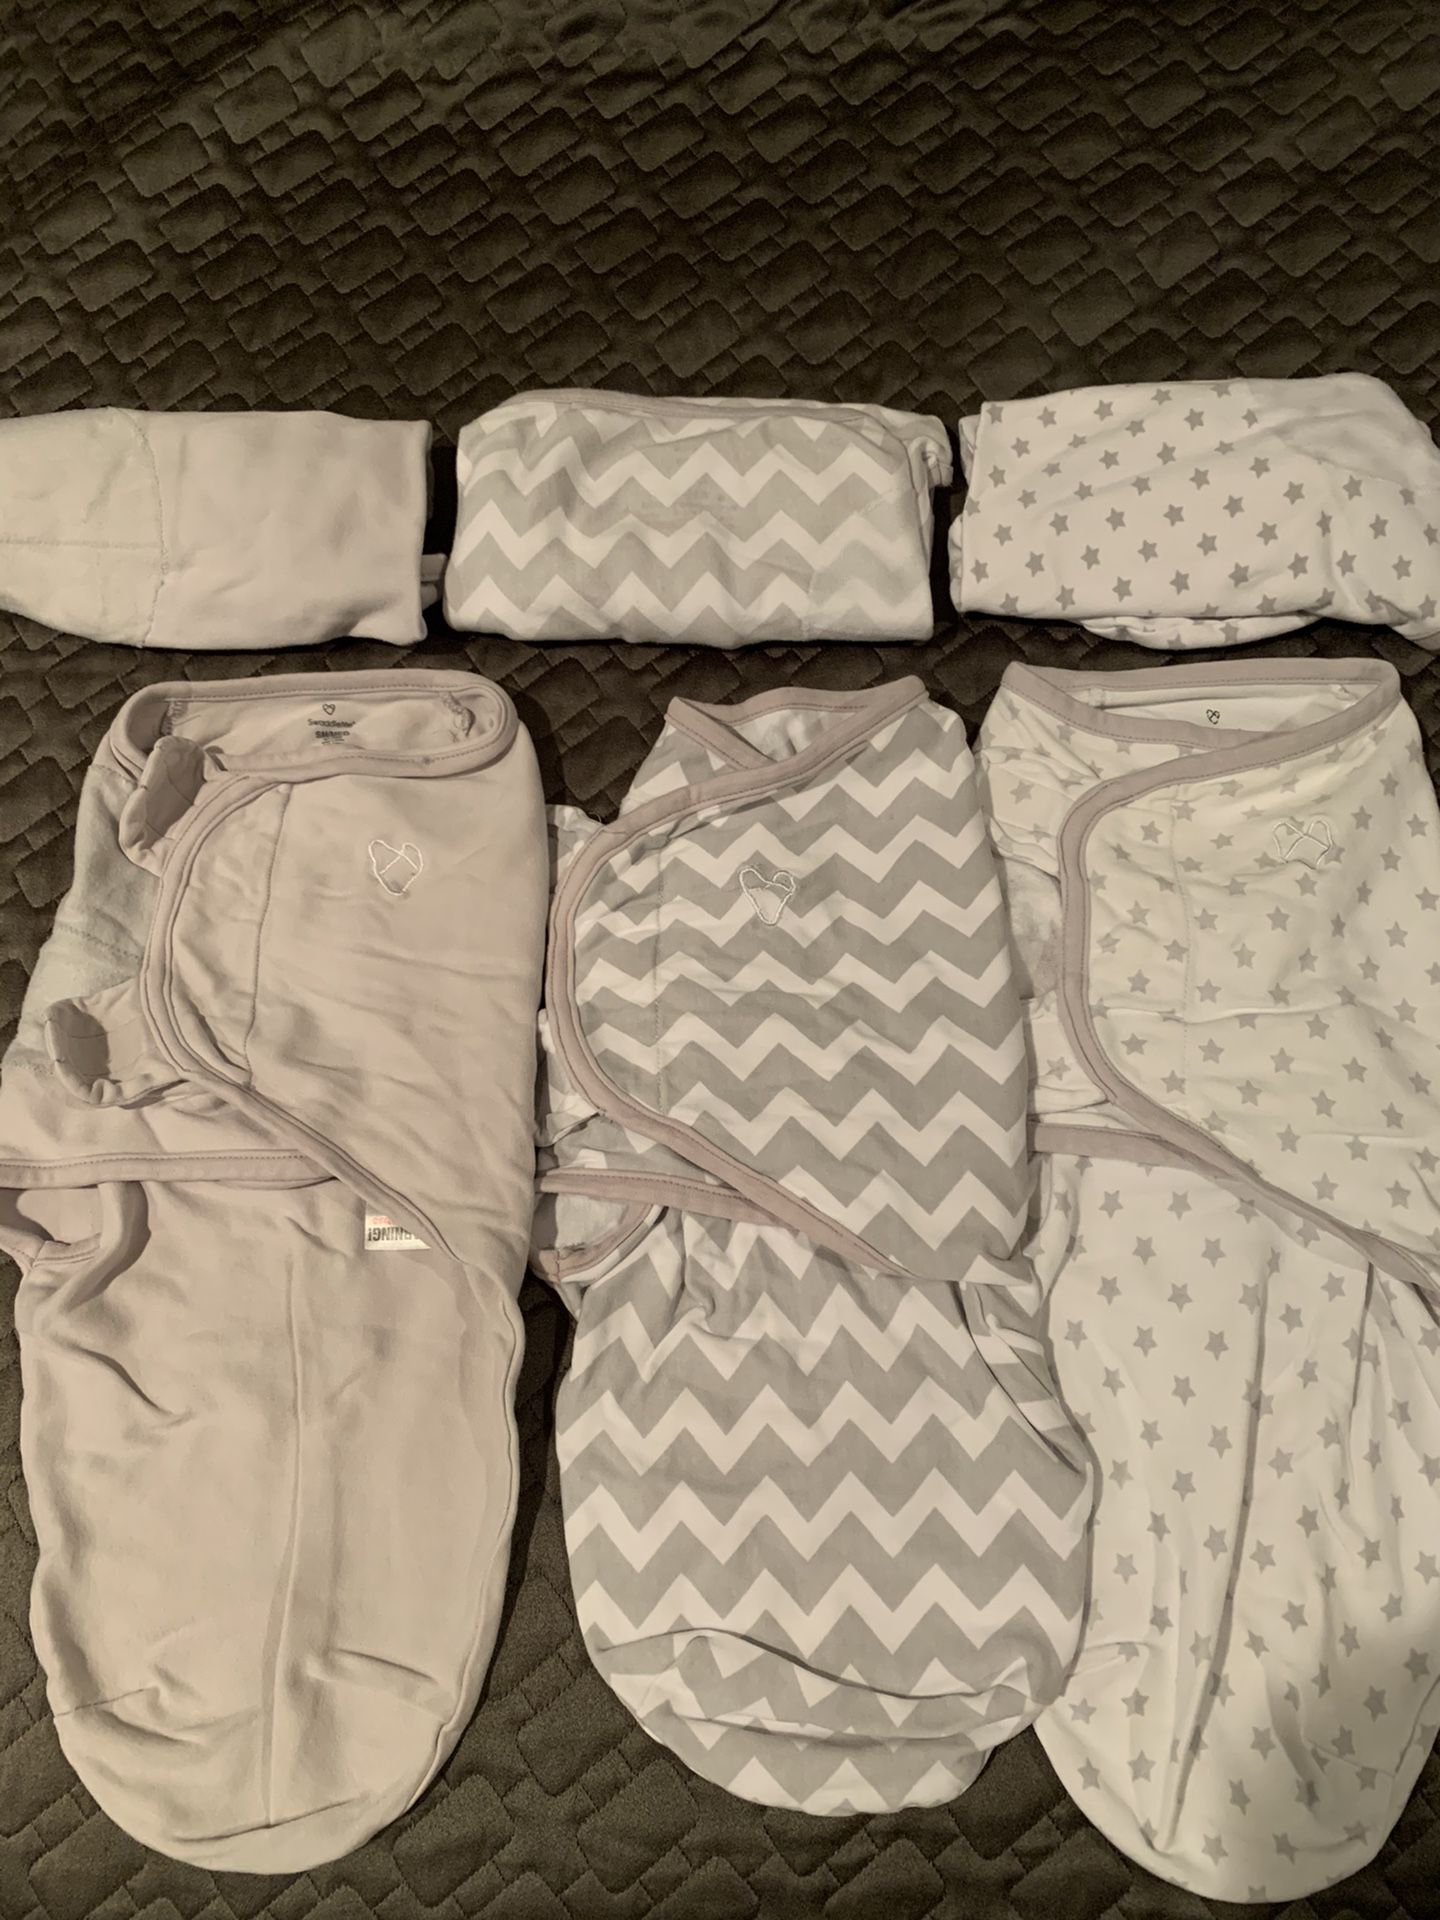 Lot of 6 SwaddleMe Swaddles Sz S 0-3 Months